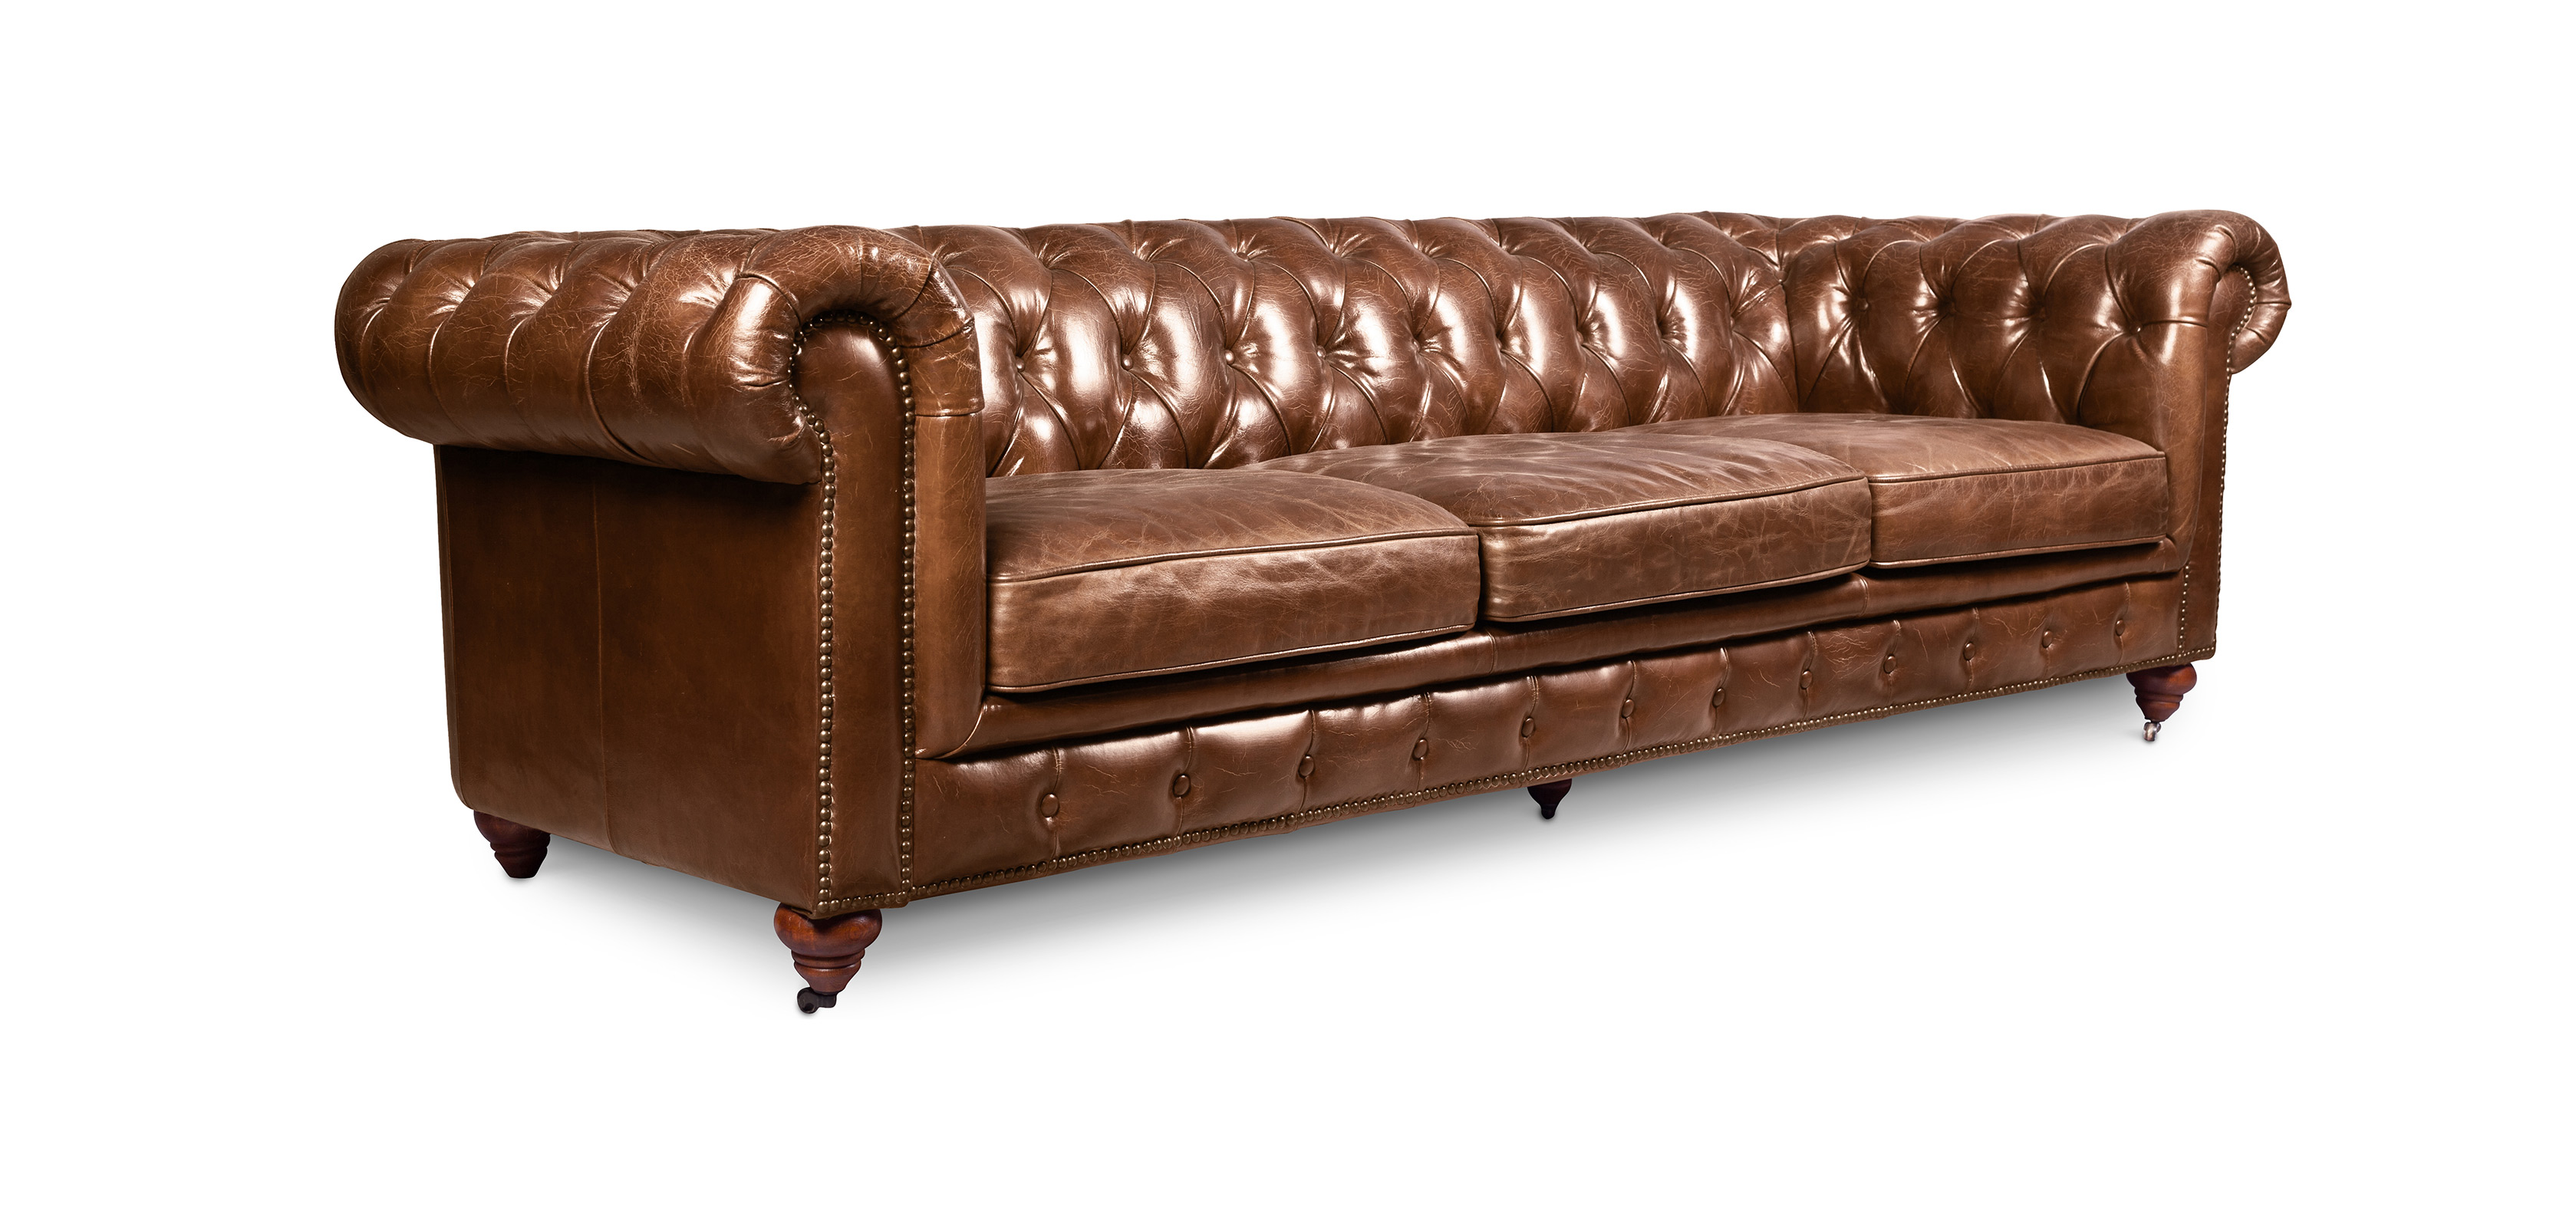 brown leather chesterfield sofa ebay